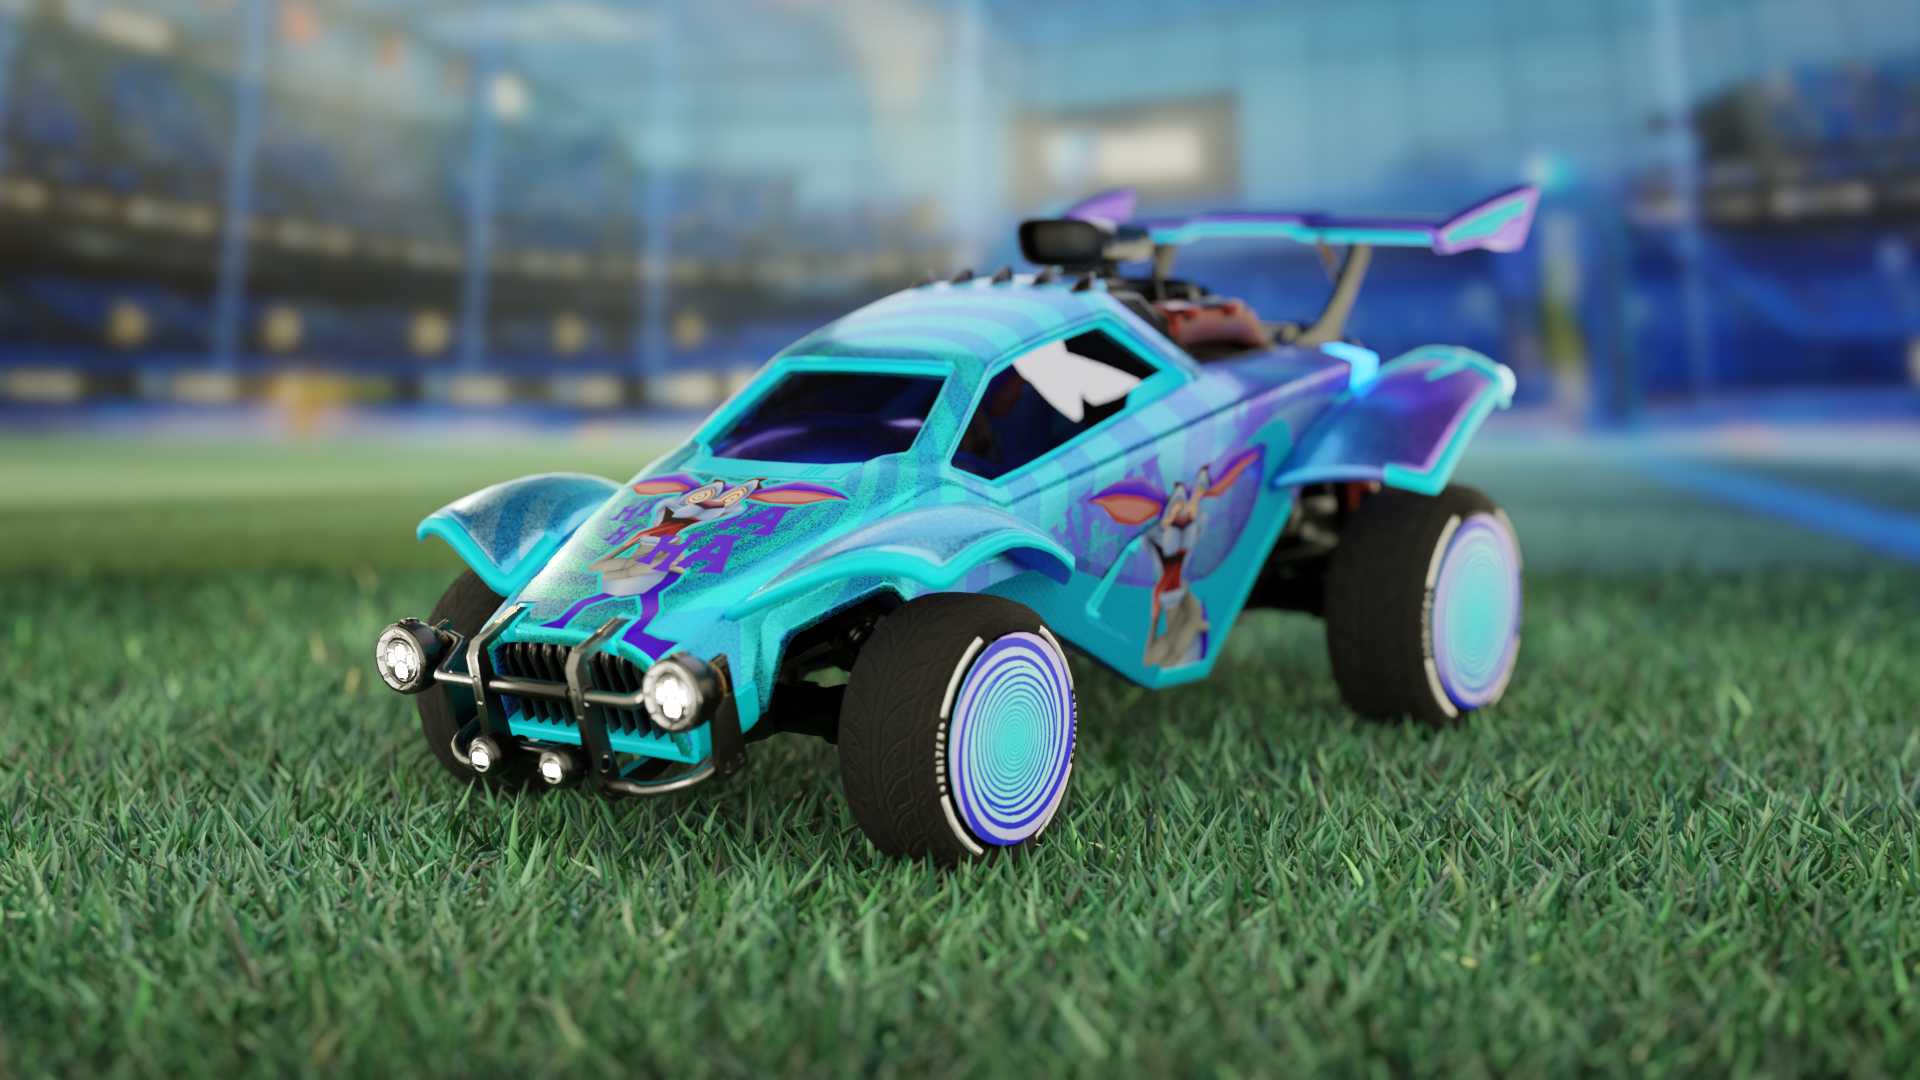 Ripper Roo Octane Decal + Wheels (Animated)